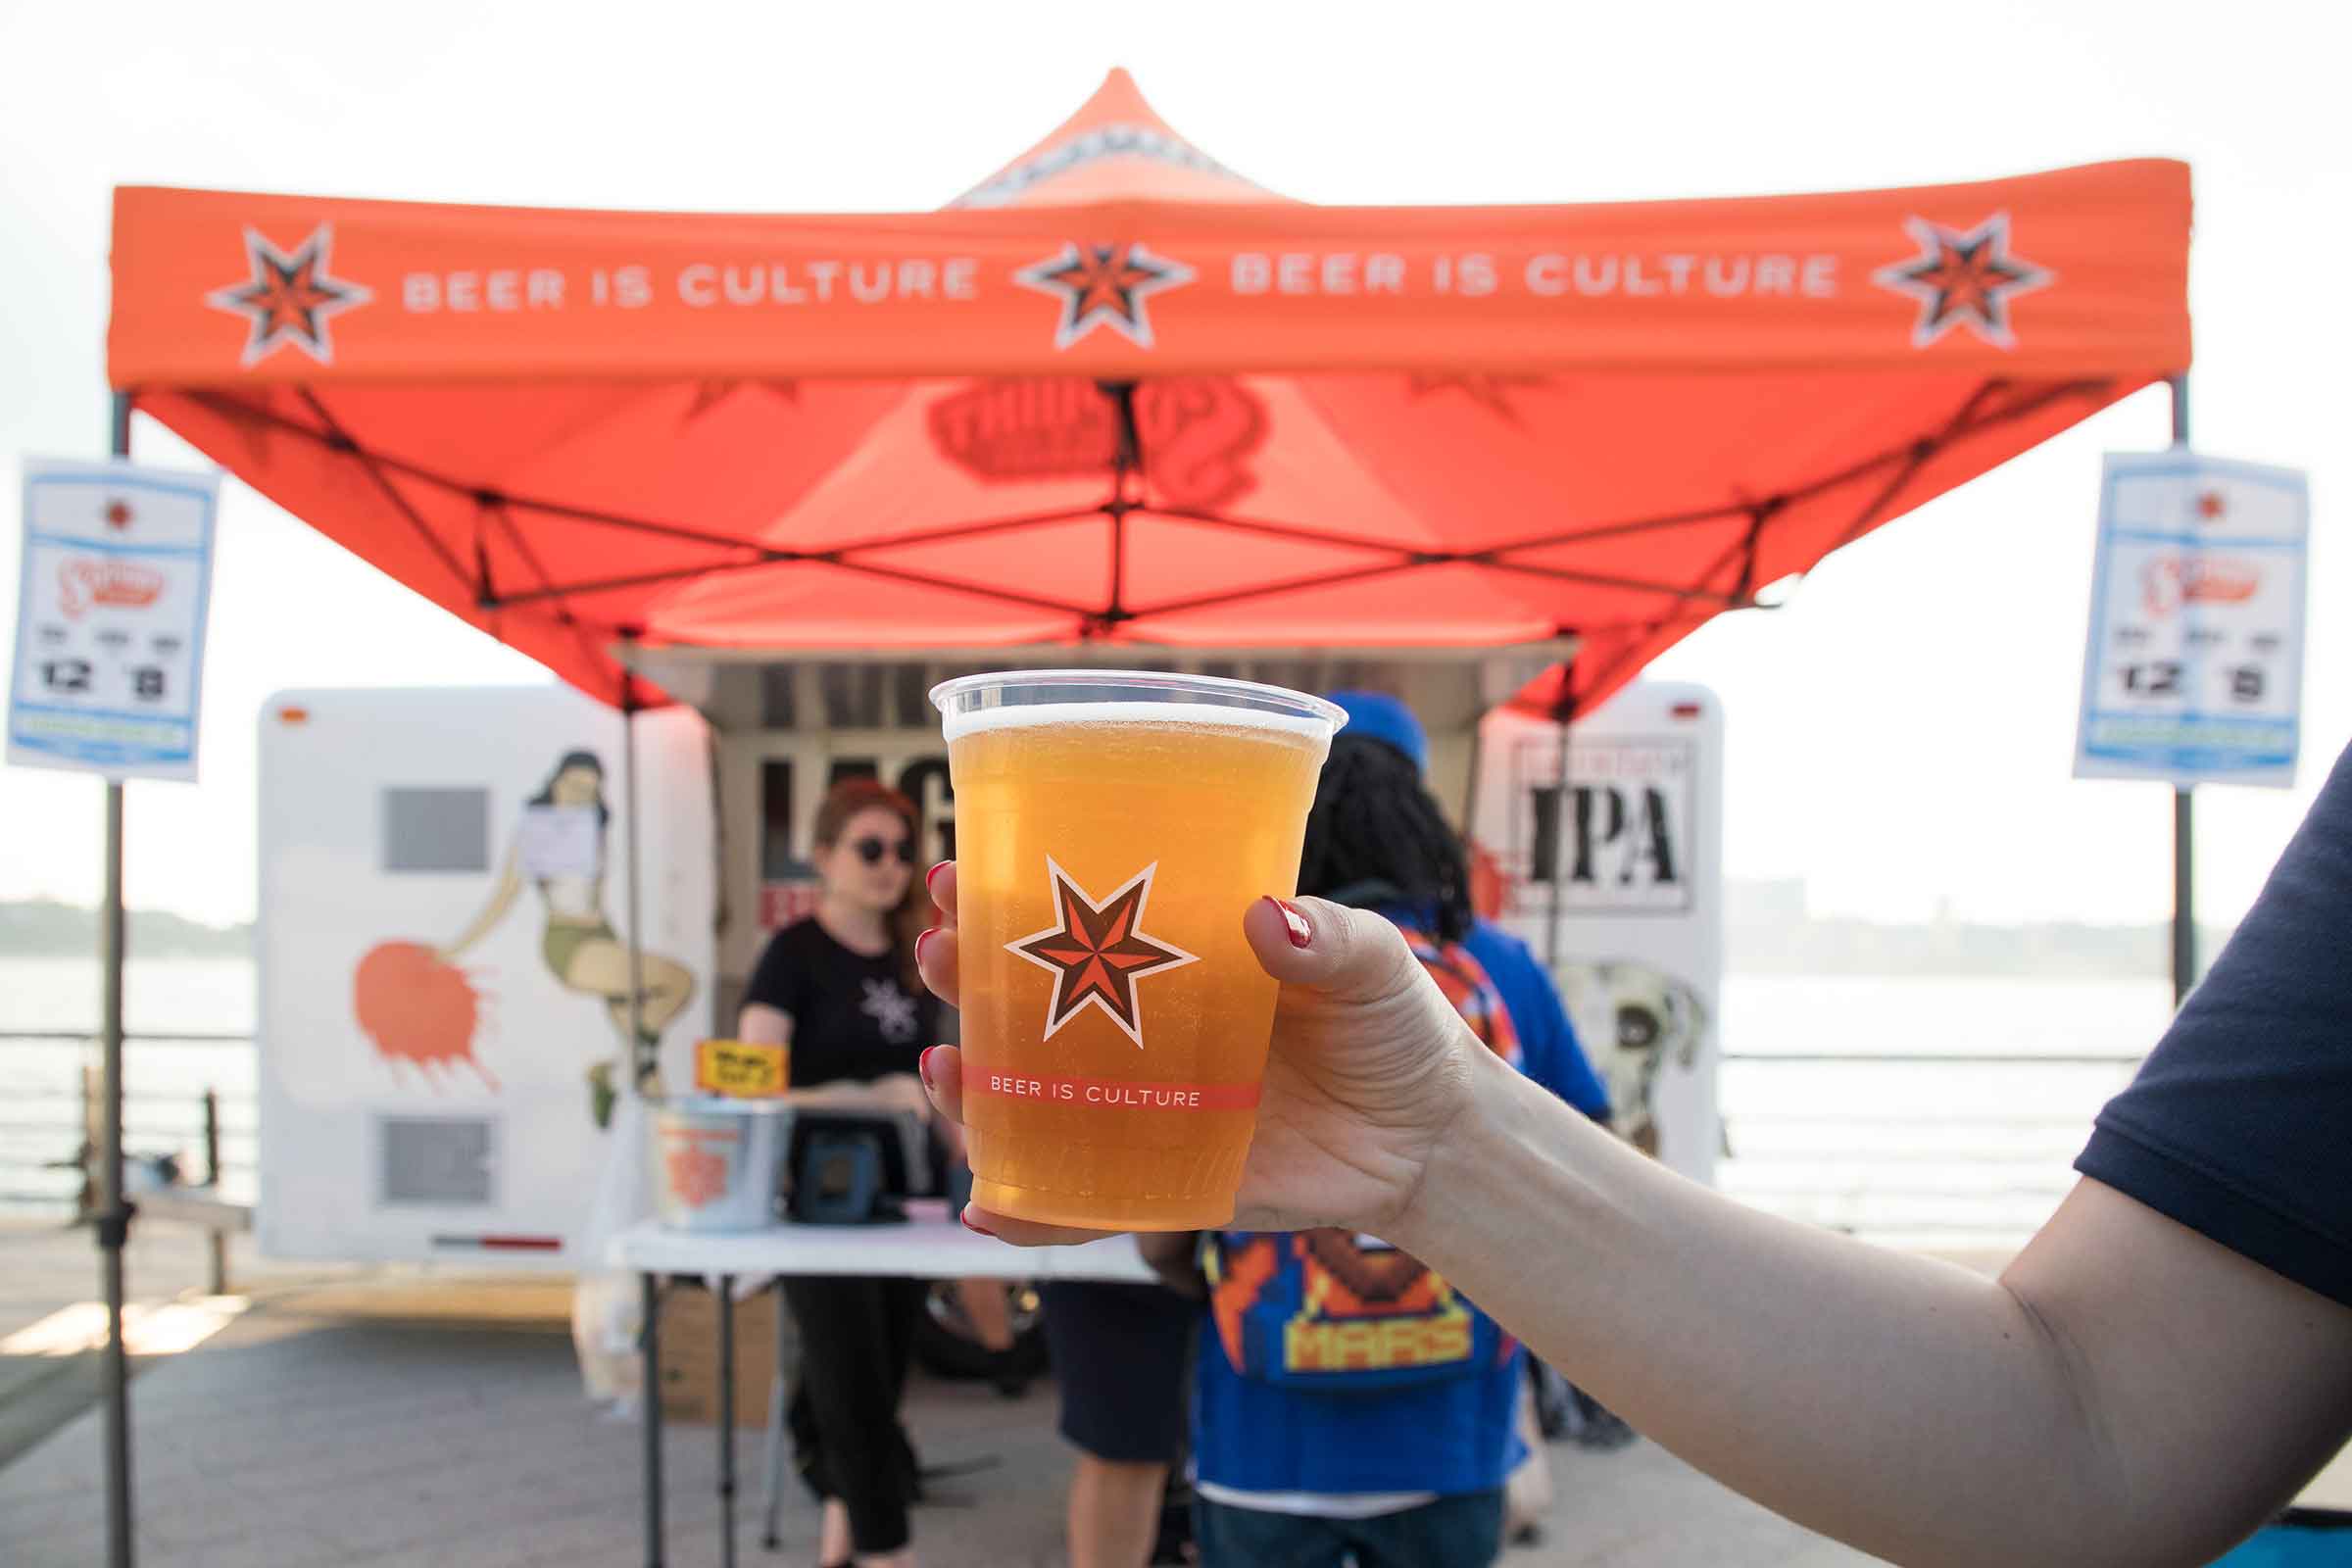 Sixpoint provides beer and other beverages as a sponsor for Hudson River Park